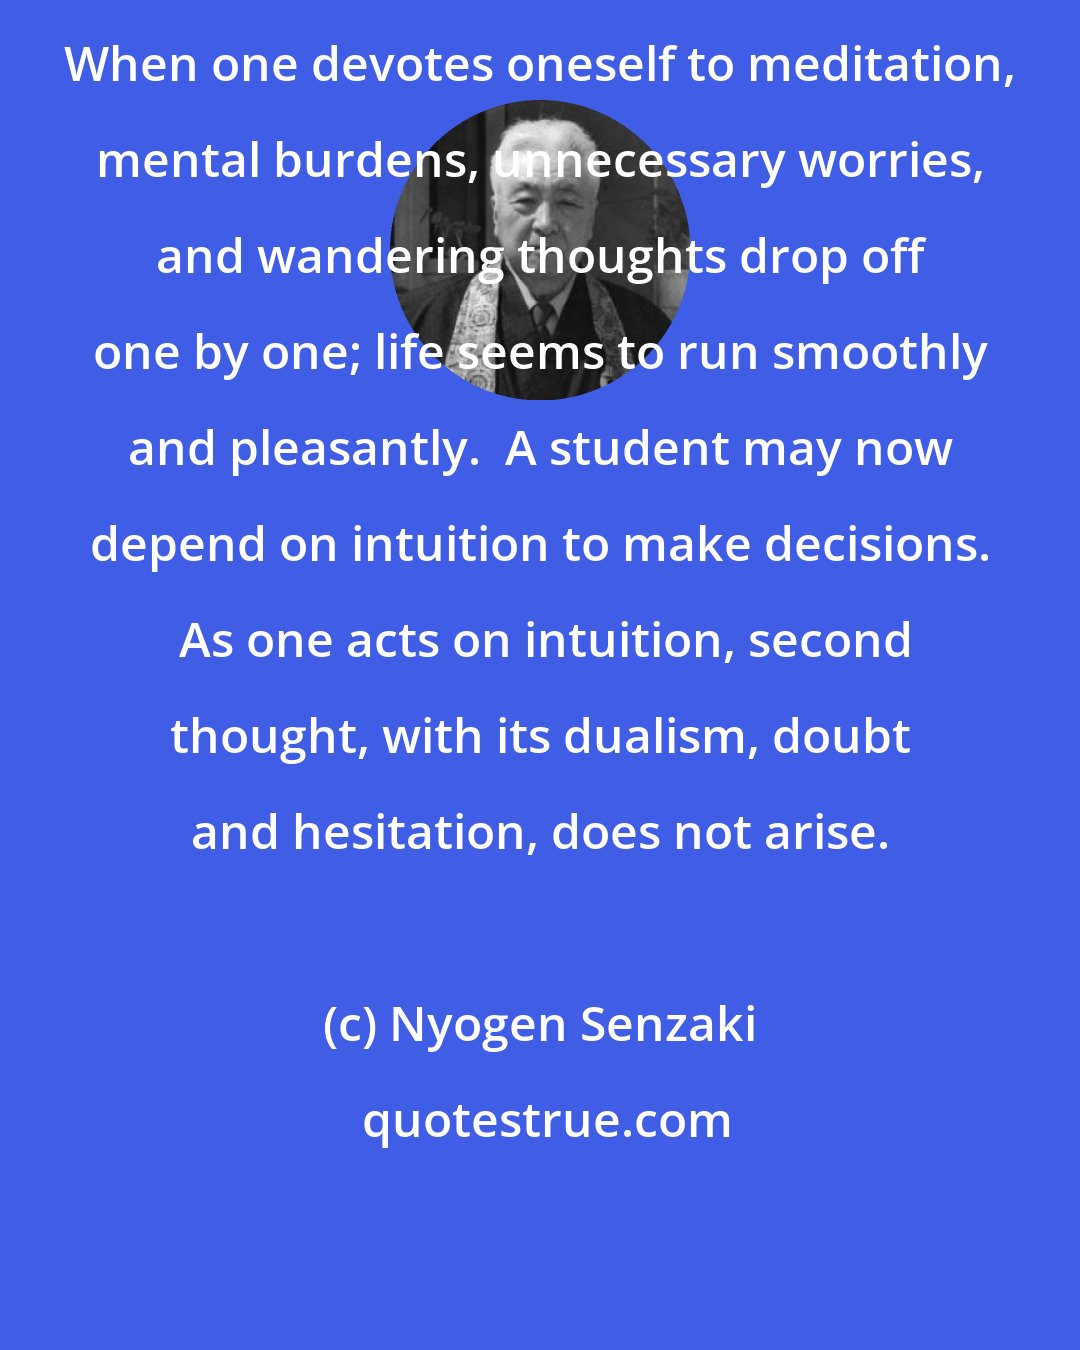 Nyogen Senzaki: When one devotes oneself to meditation, mental burdens, unnecessary worries, and wandering thoughts drop off one by one; life seems to run smoothly and pleasantly.  A student may now depend on intuition to make decisions.  As one acts on intuition, second thought, with its dualism, doubt and hesitation, does not arise.